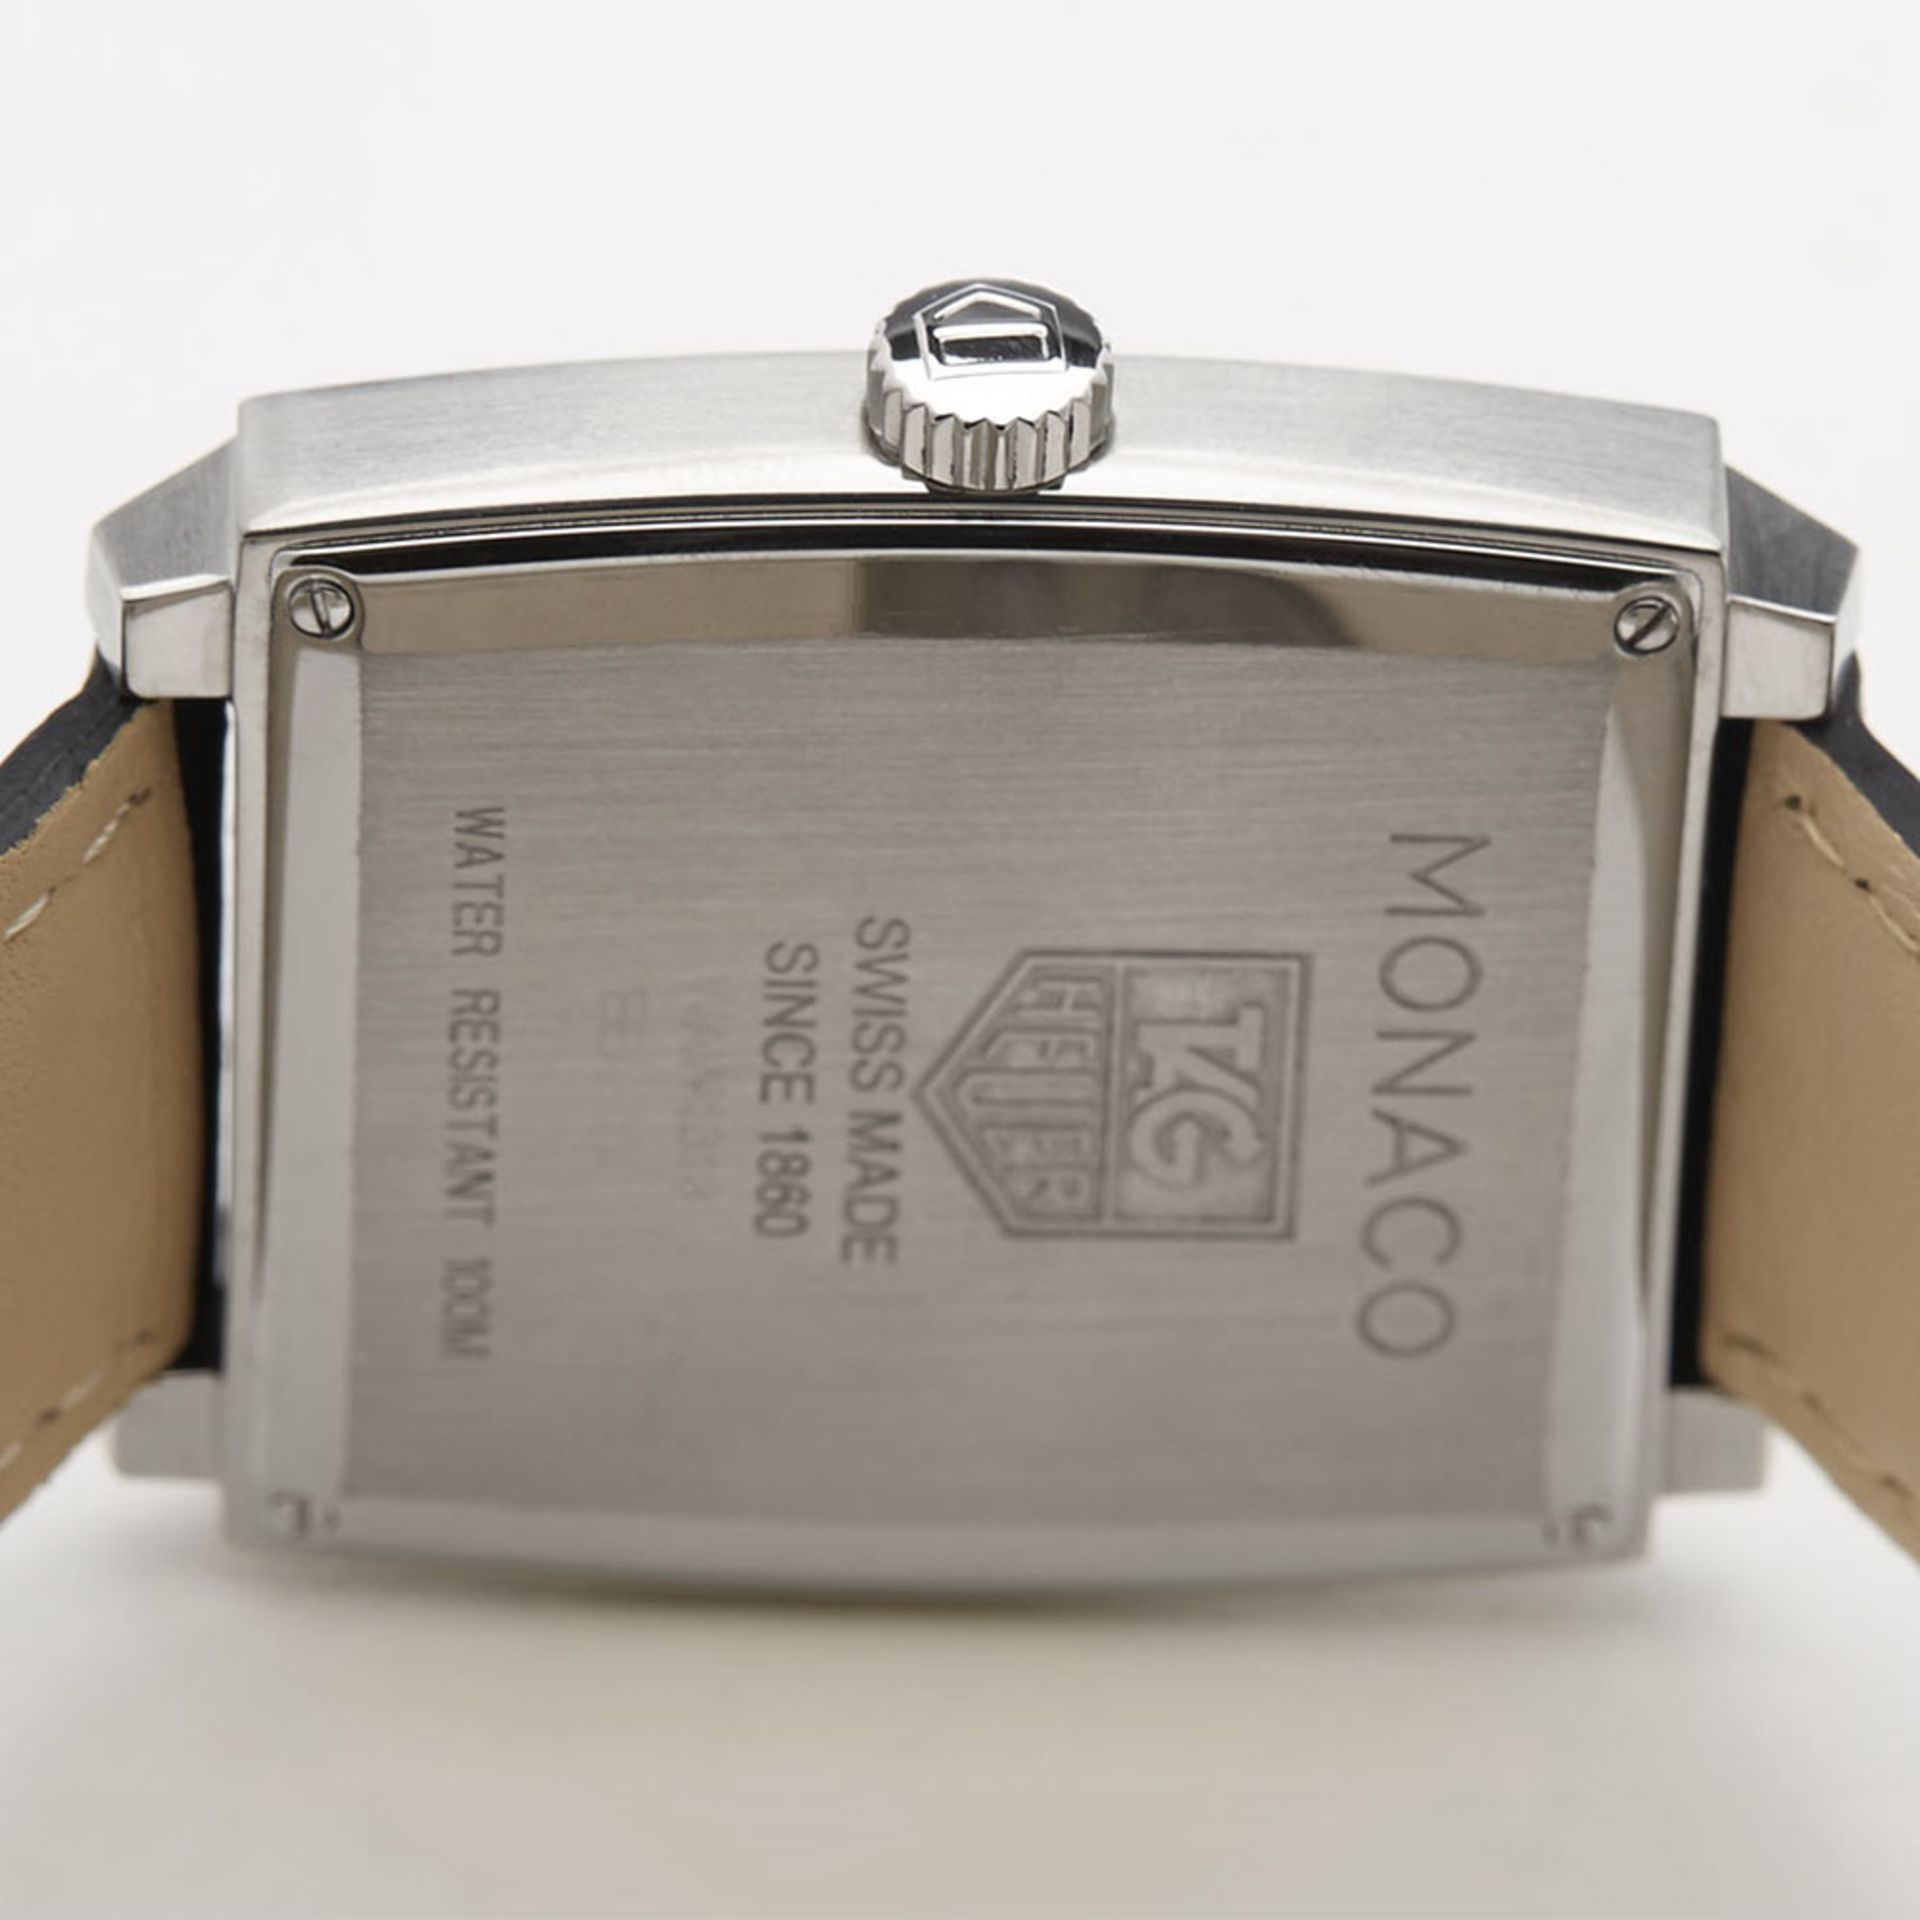 2010 Tag Heuer Monaco 37mm Stainless Steel - WAW1313 - Image 3 of 9